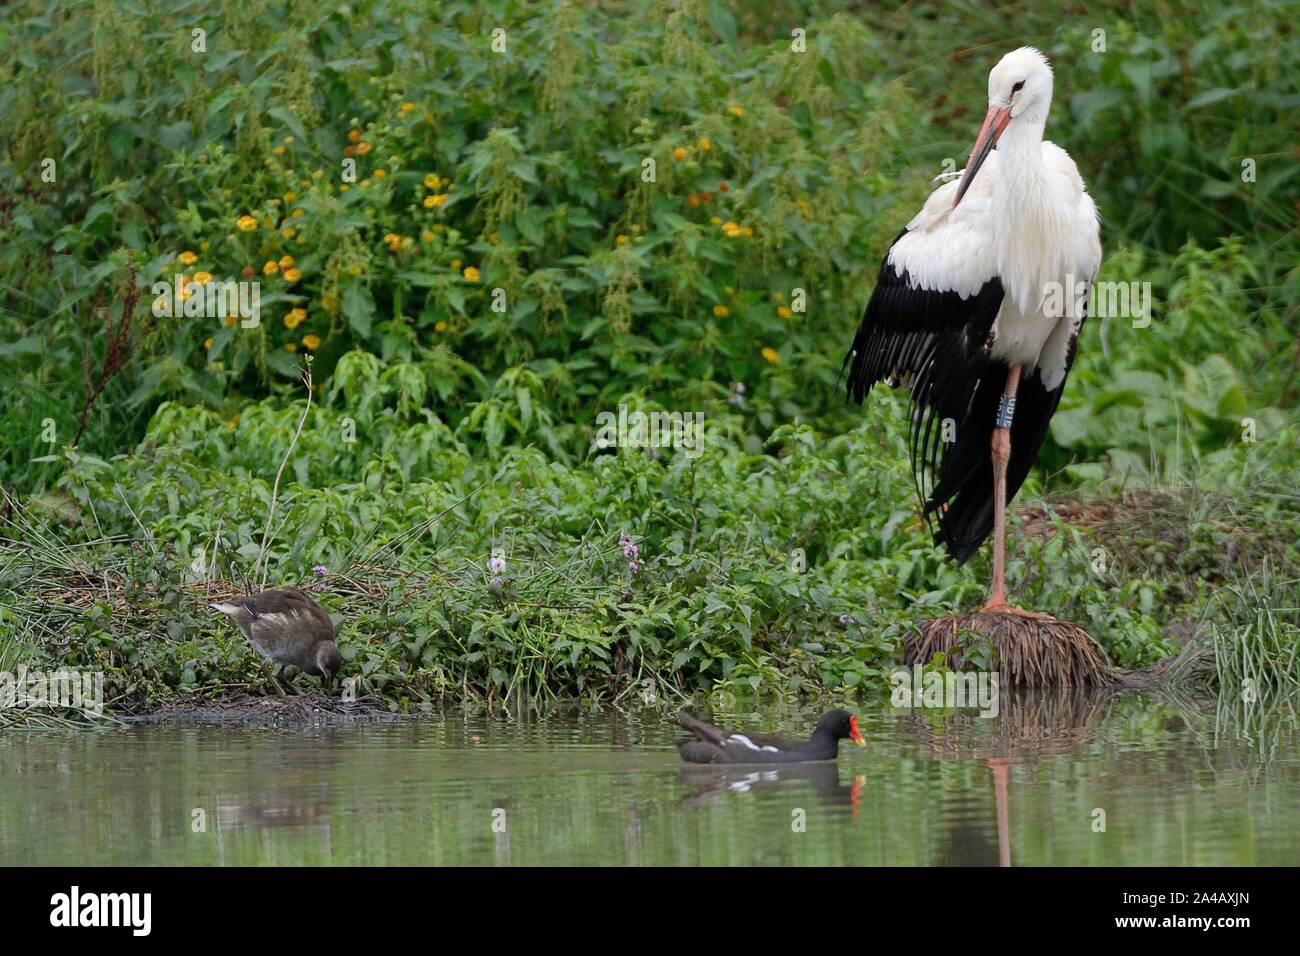 Captive reared White stork (Ciconia ciconia) resting on a pond margin soon after release, peering at Moorhens (Fulica chloropus), Knepp, Suusex, UK Stock Photo